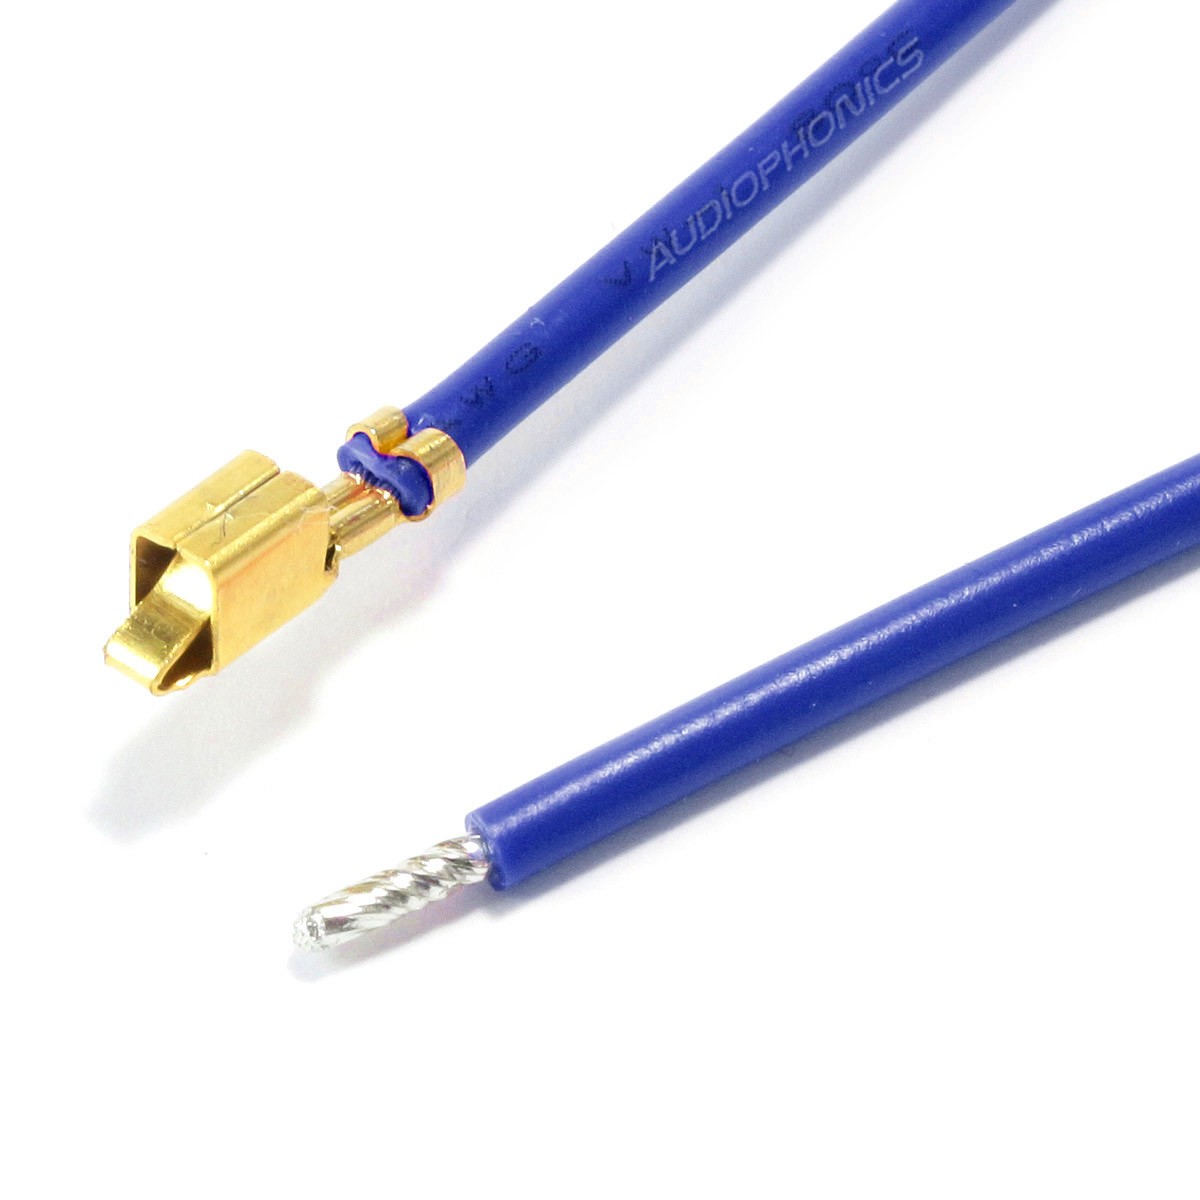 VH 3.96mm Cable Female to Bare Wire 1 Pole No Casing Gold Plated 40cm Blue (x10)